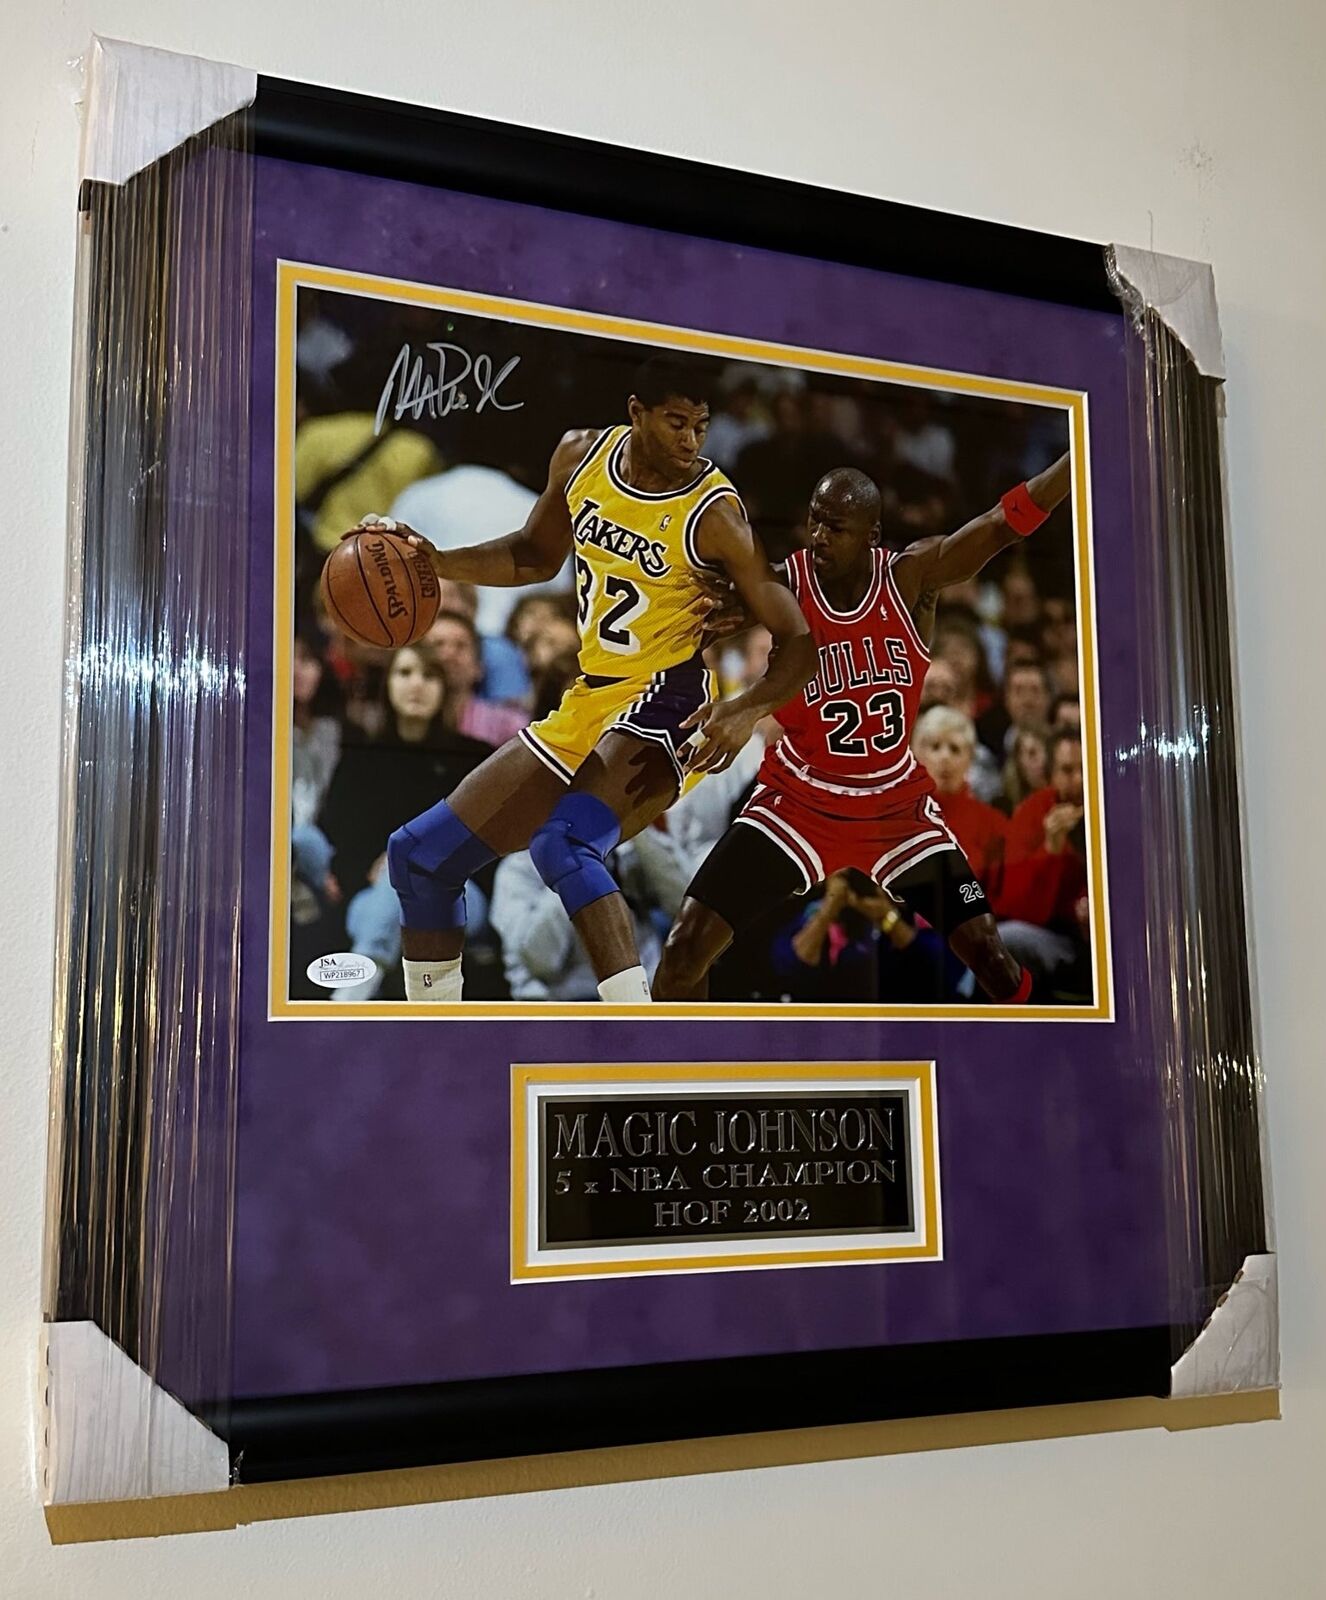 Magic Johnson Autographed Framed Photo Authenticated by PSA